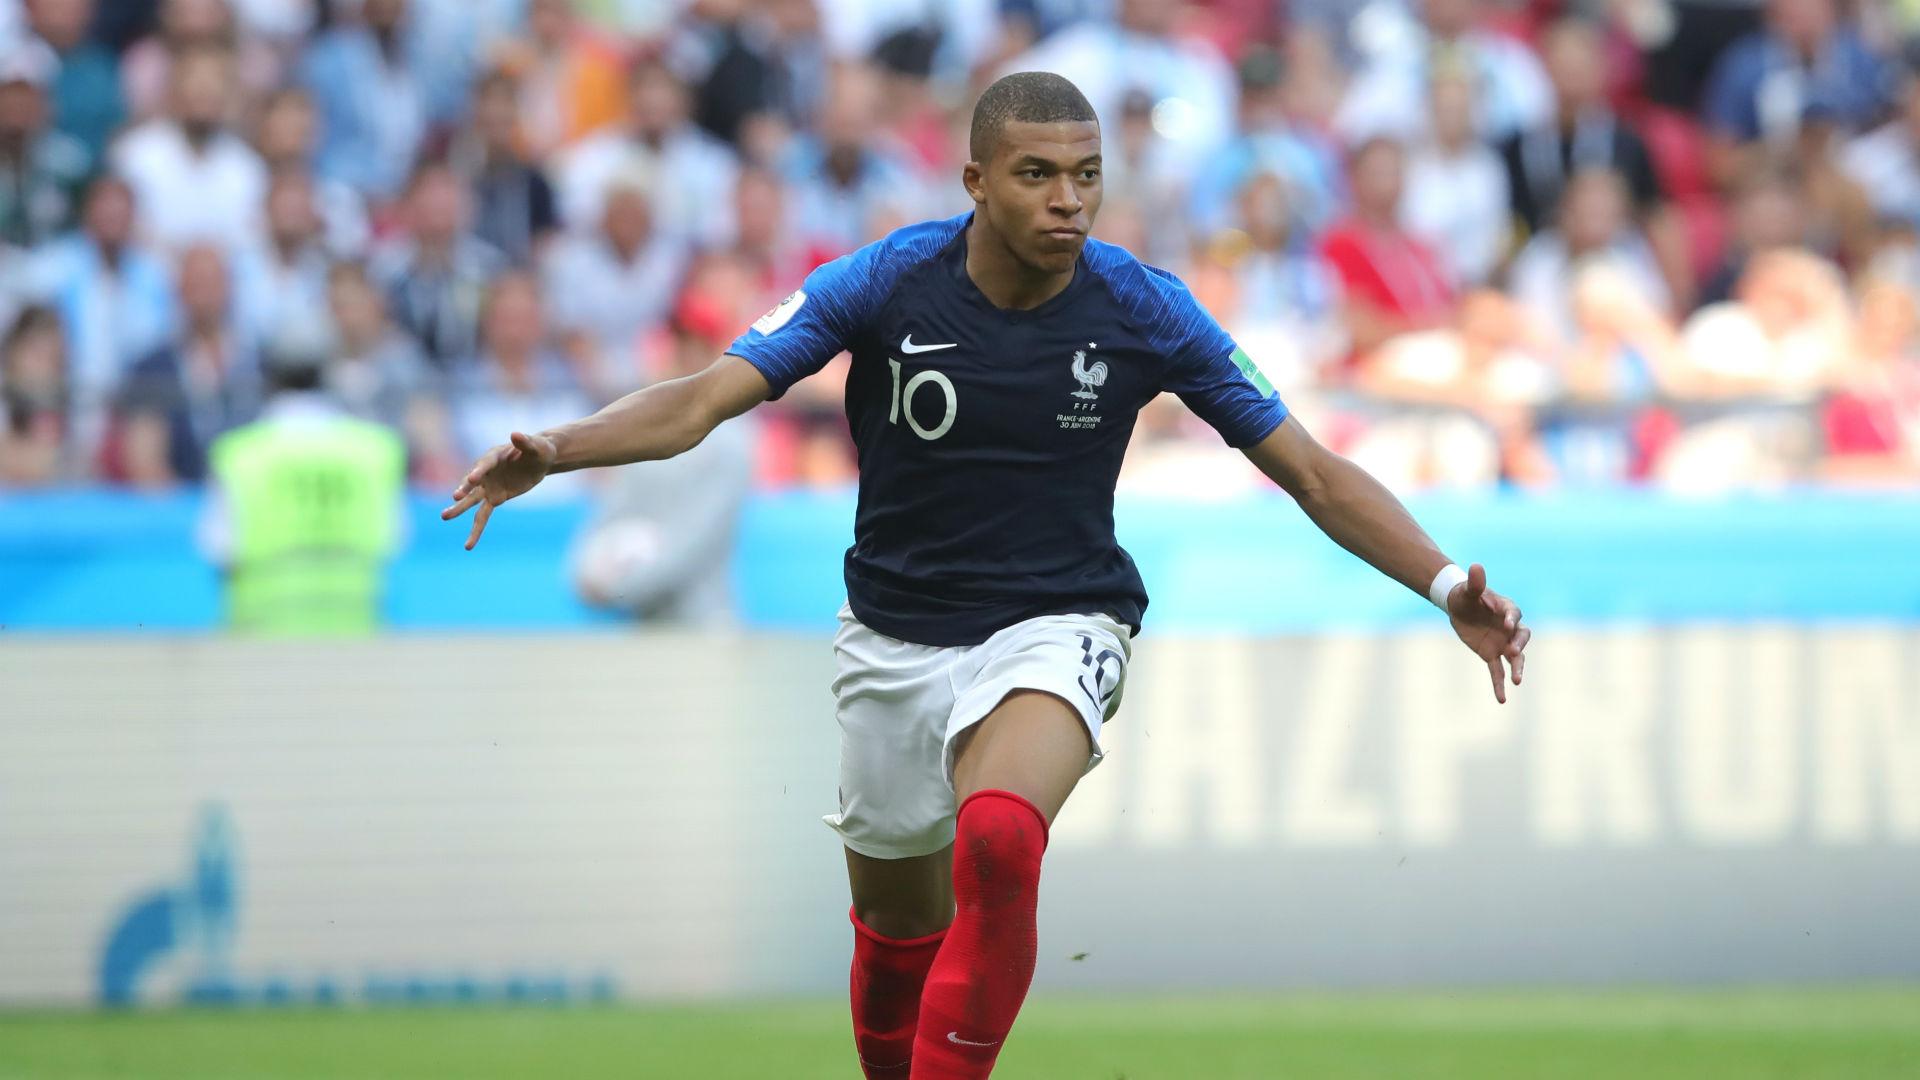 World Cup 2018: Kylian Mbappe scores twice to lead France past